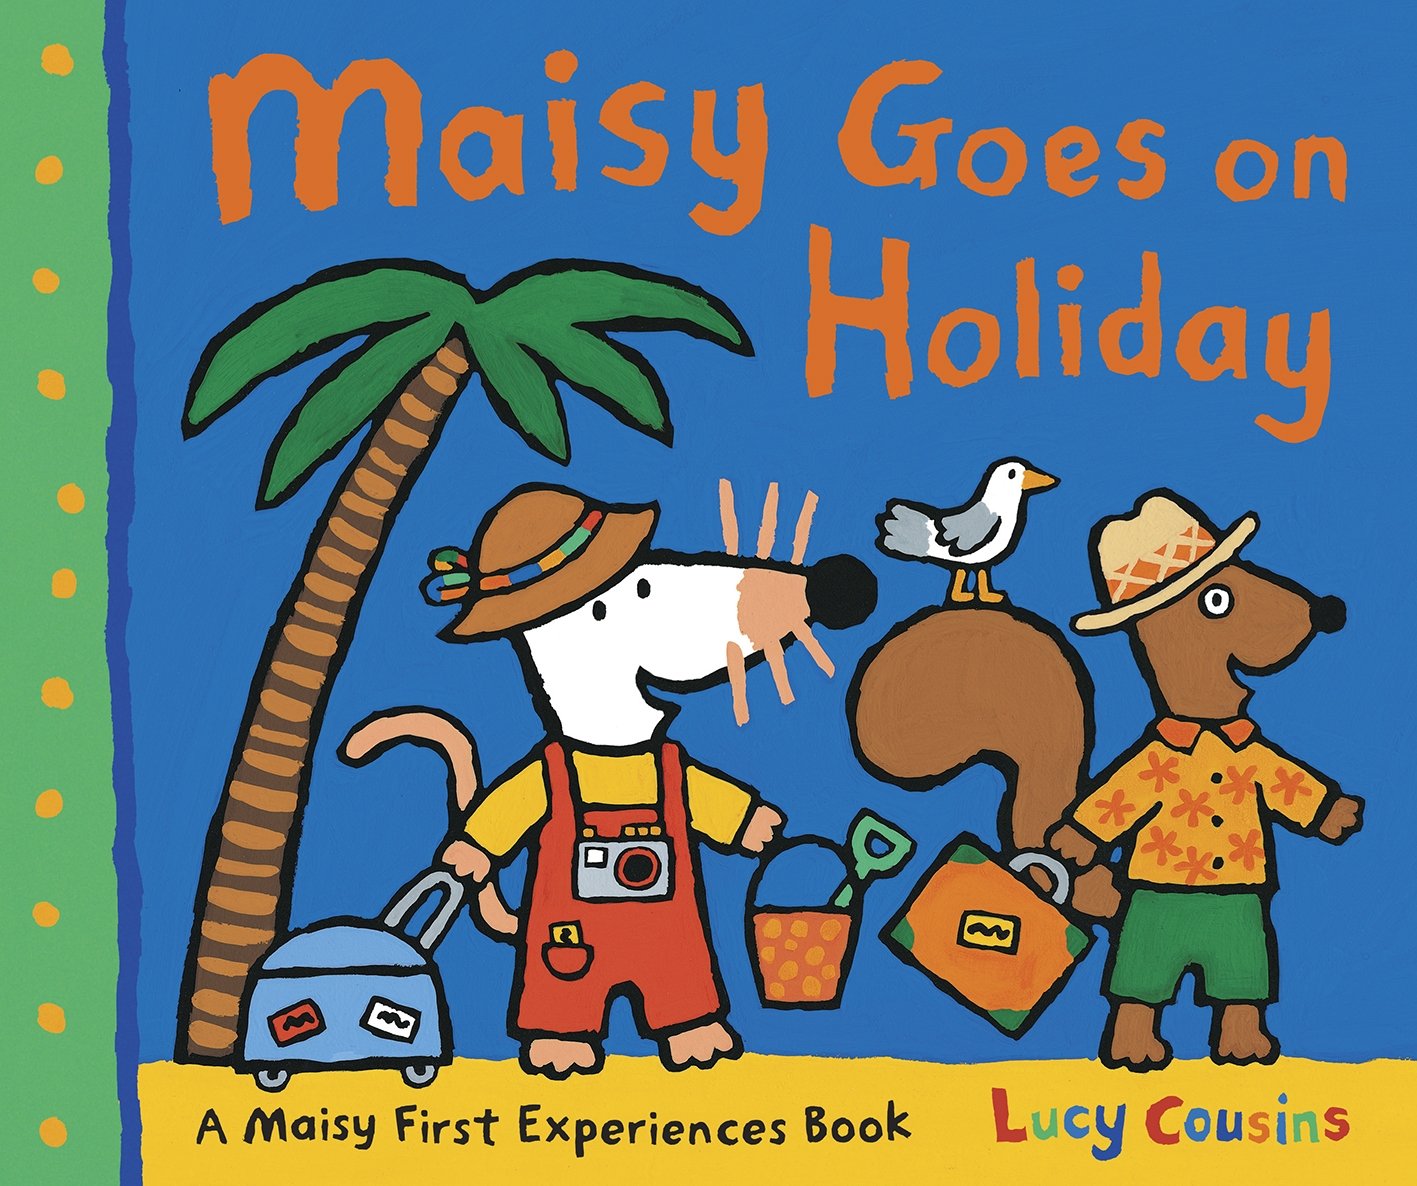 Maisy Goes on Holiday - A Maisy First Experiences Book by Lucy Cousins